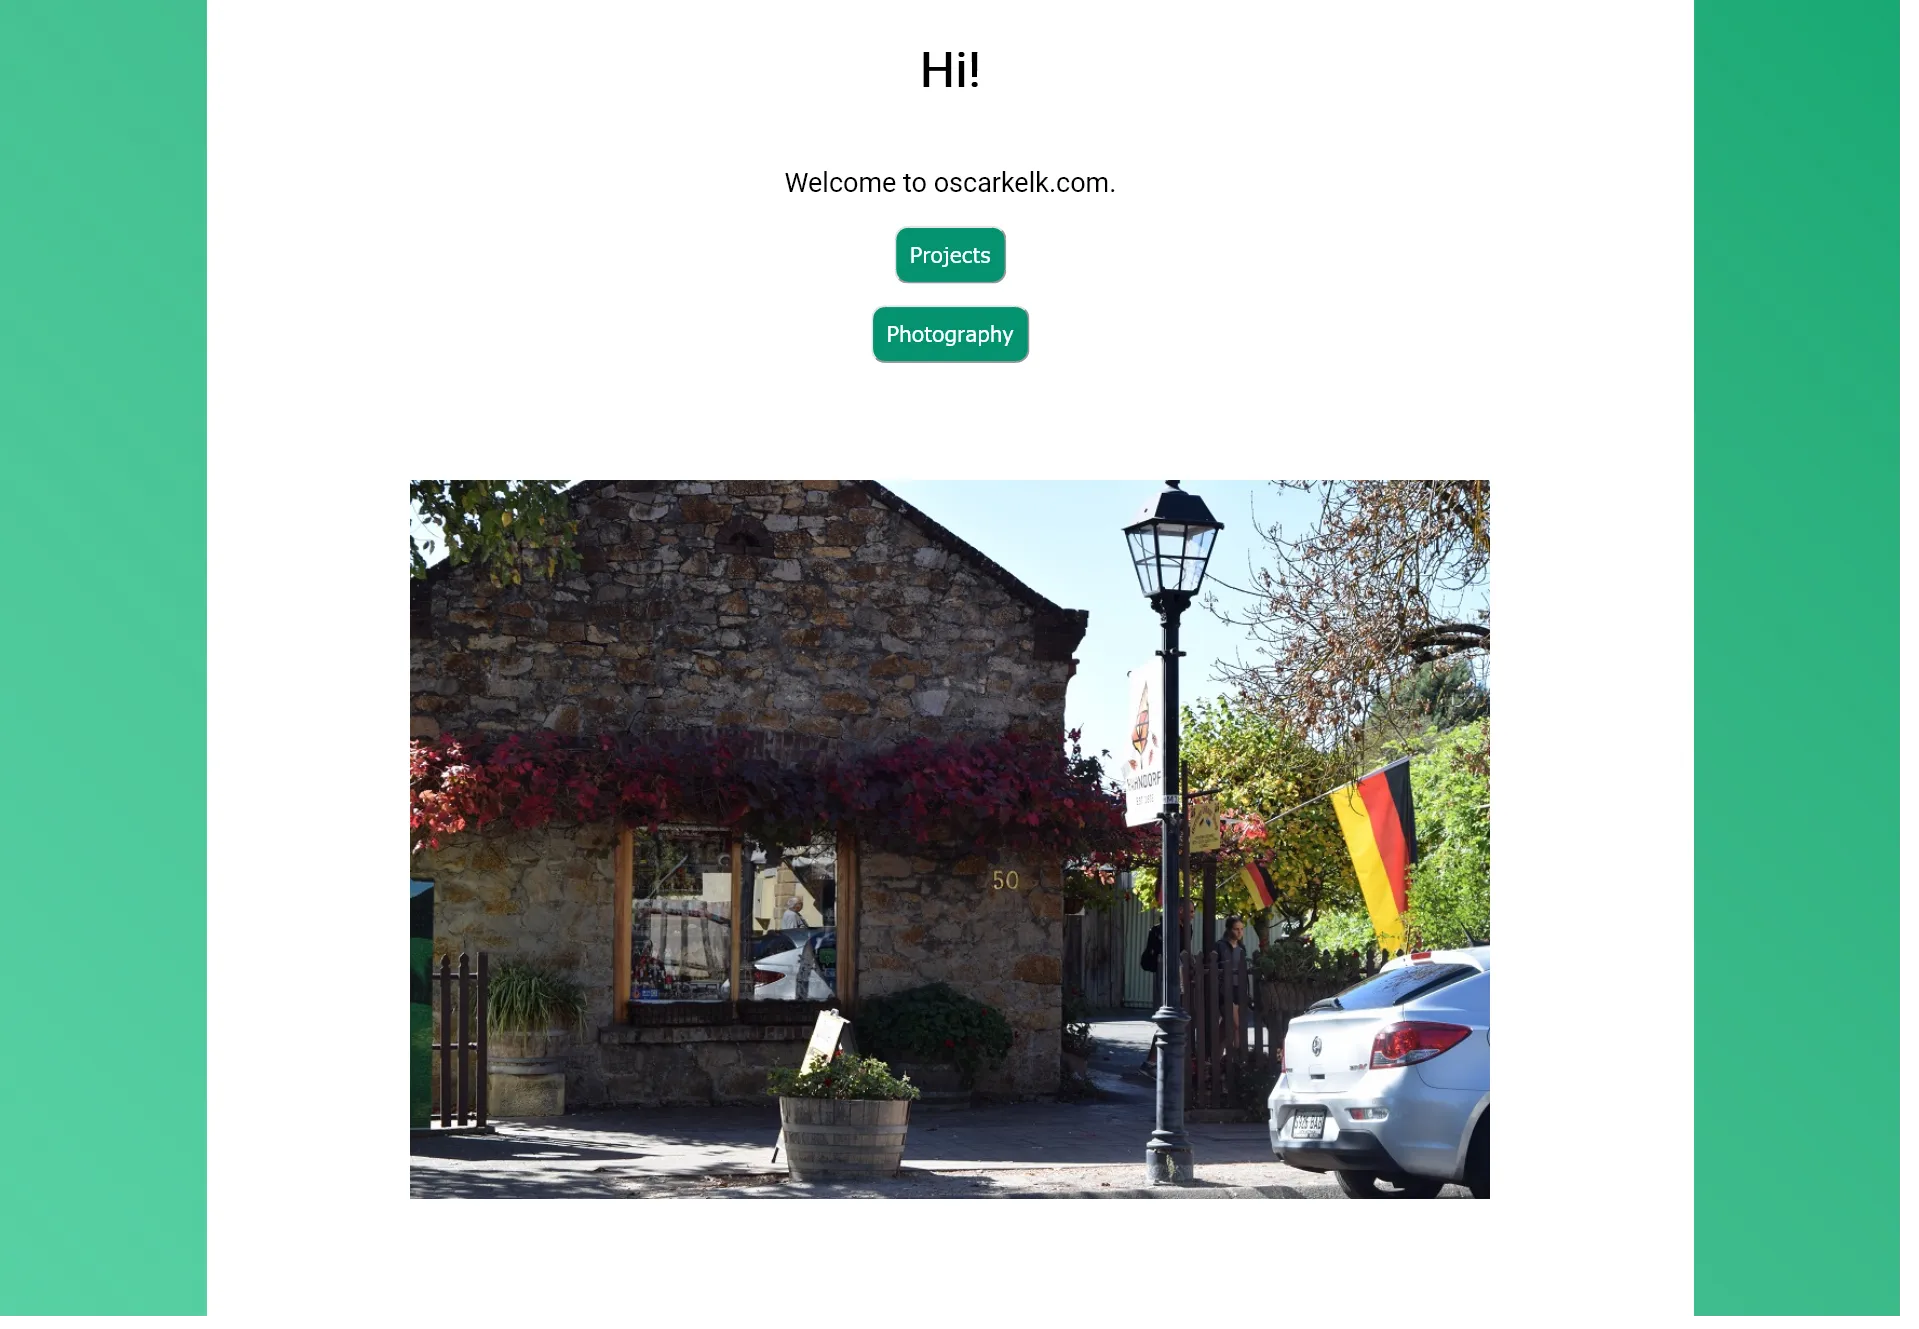 Version 3 of oscarkelk.com's home page, with its green buttons and featured picture taken in Hahndorf, SA